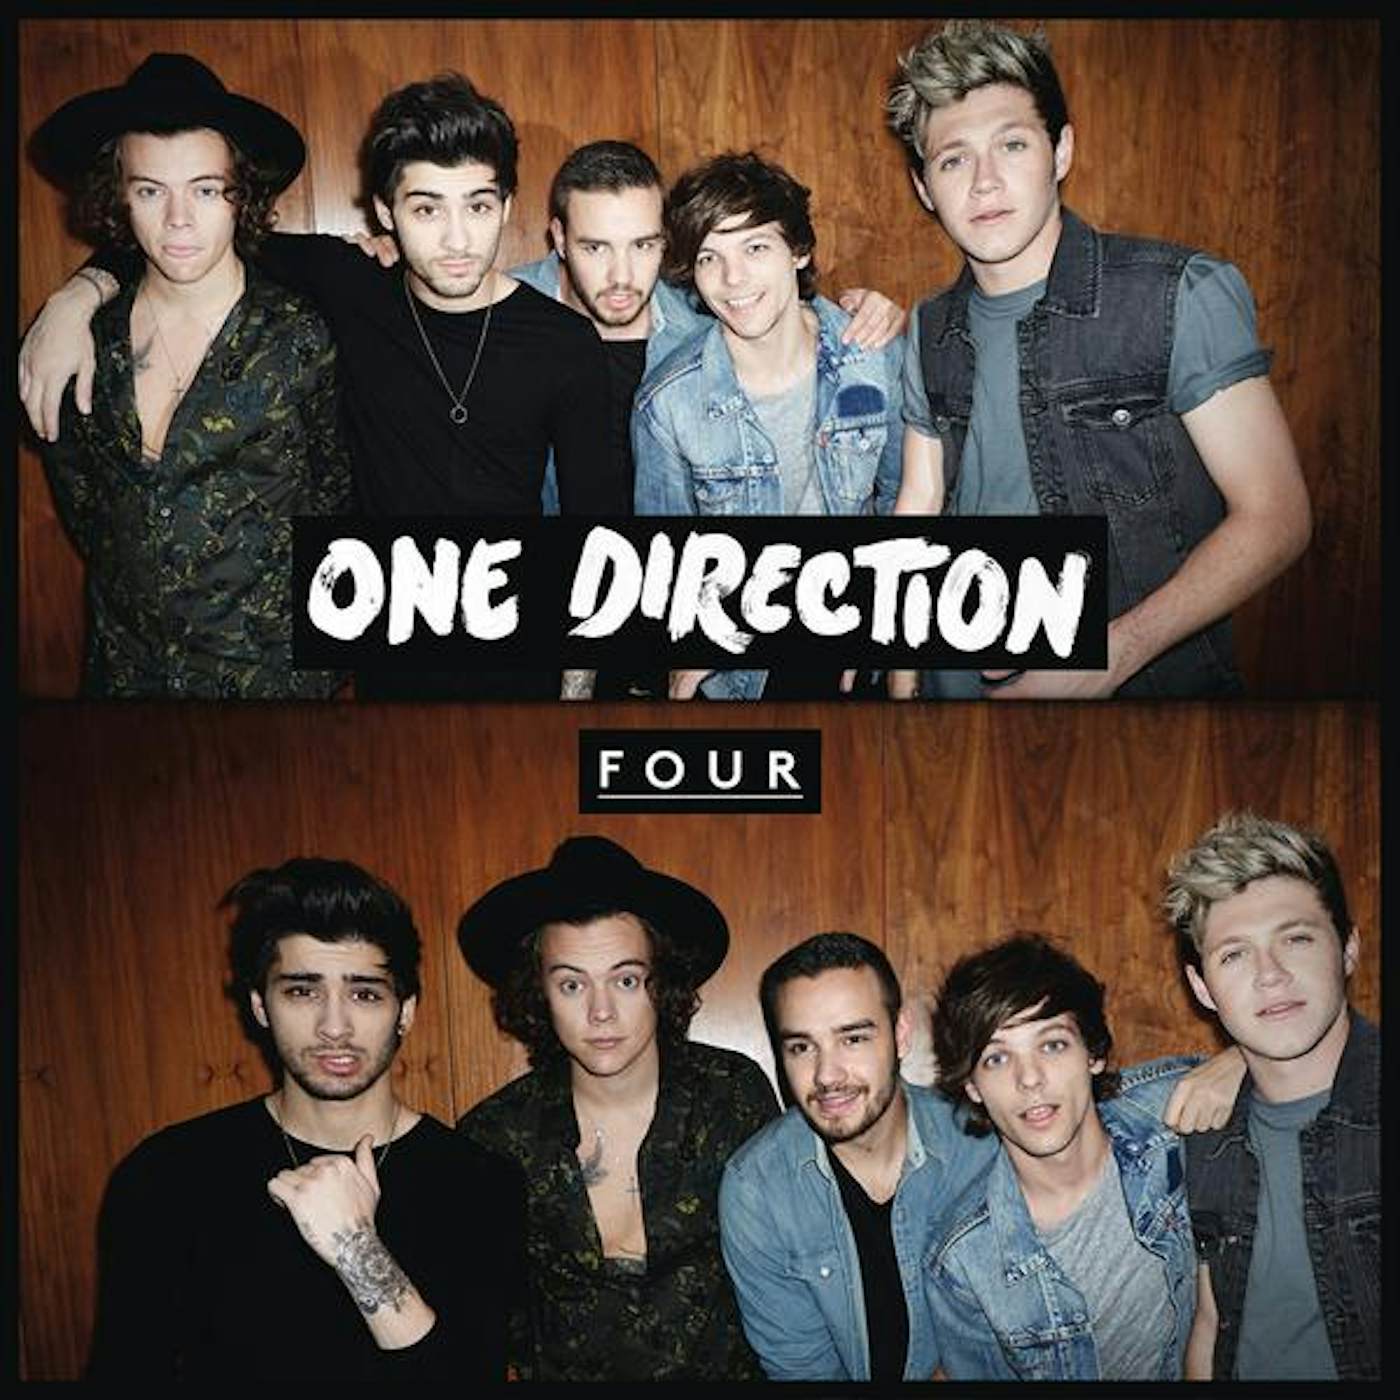 One Direction FOUR CD